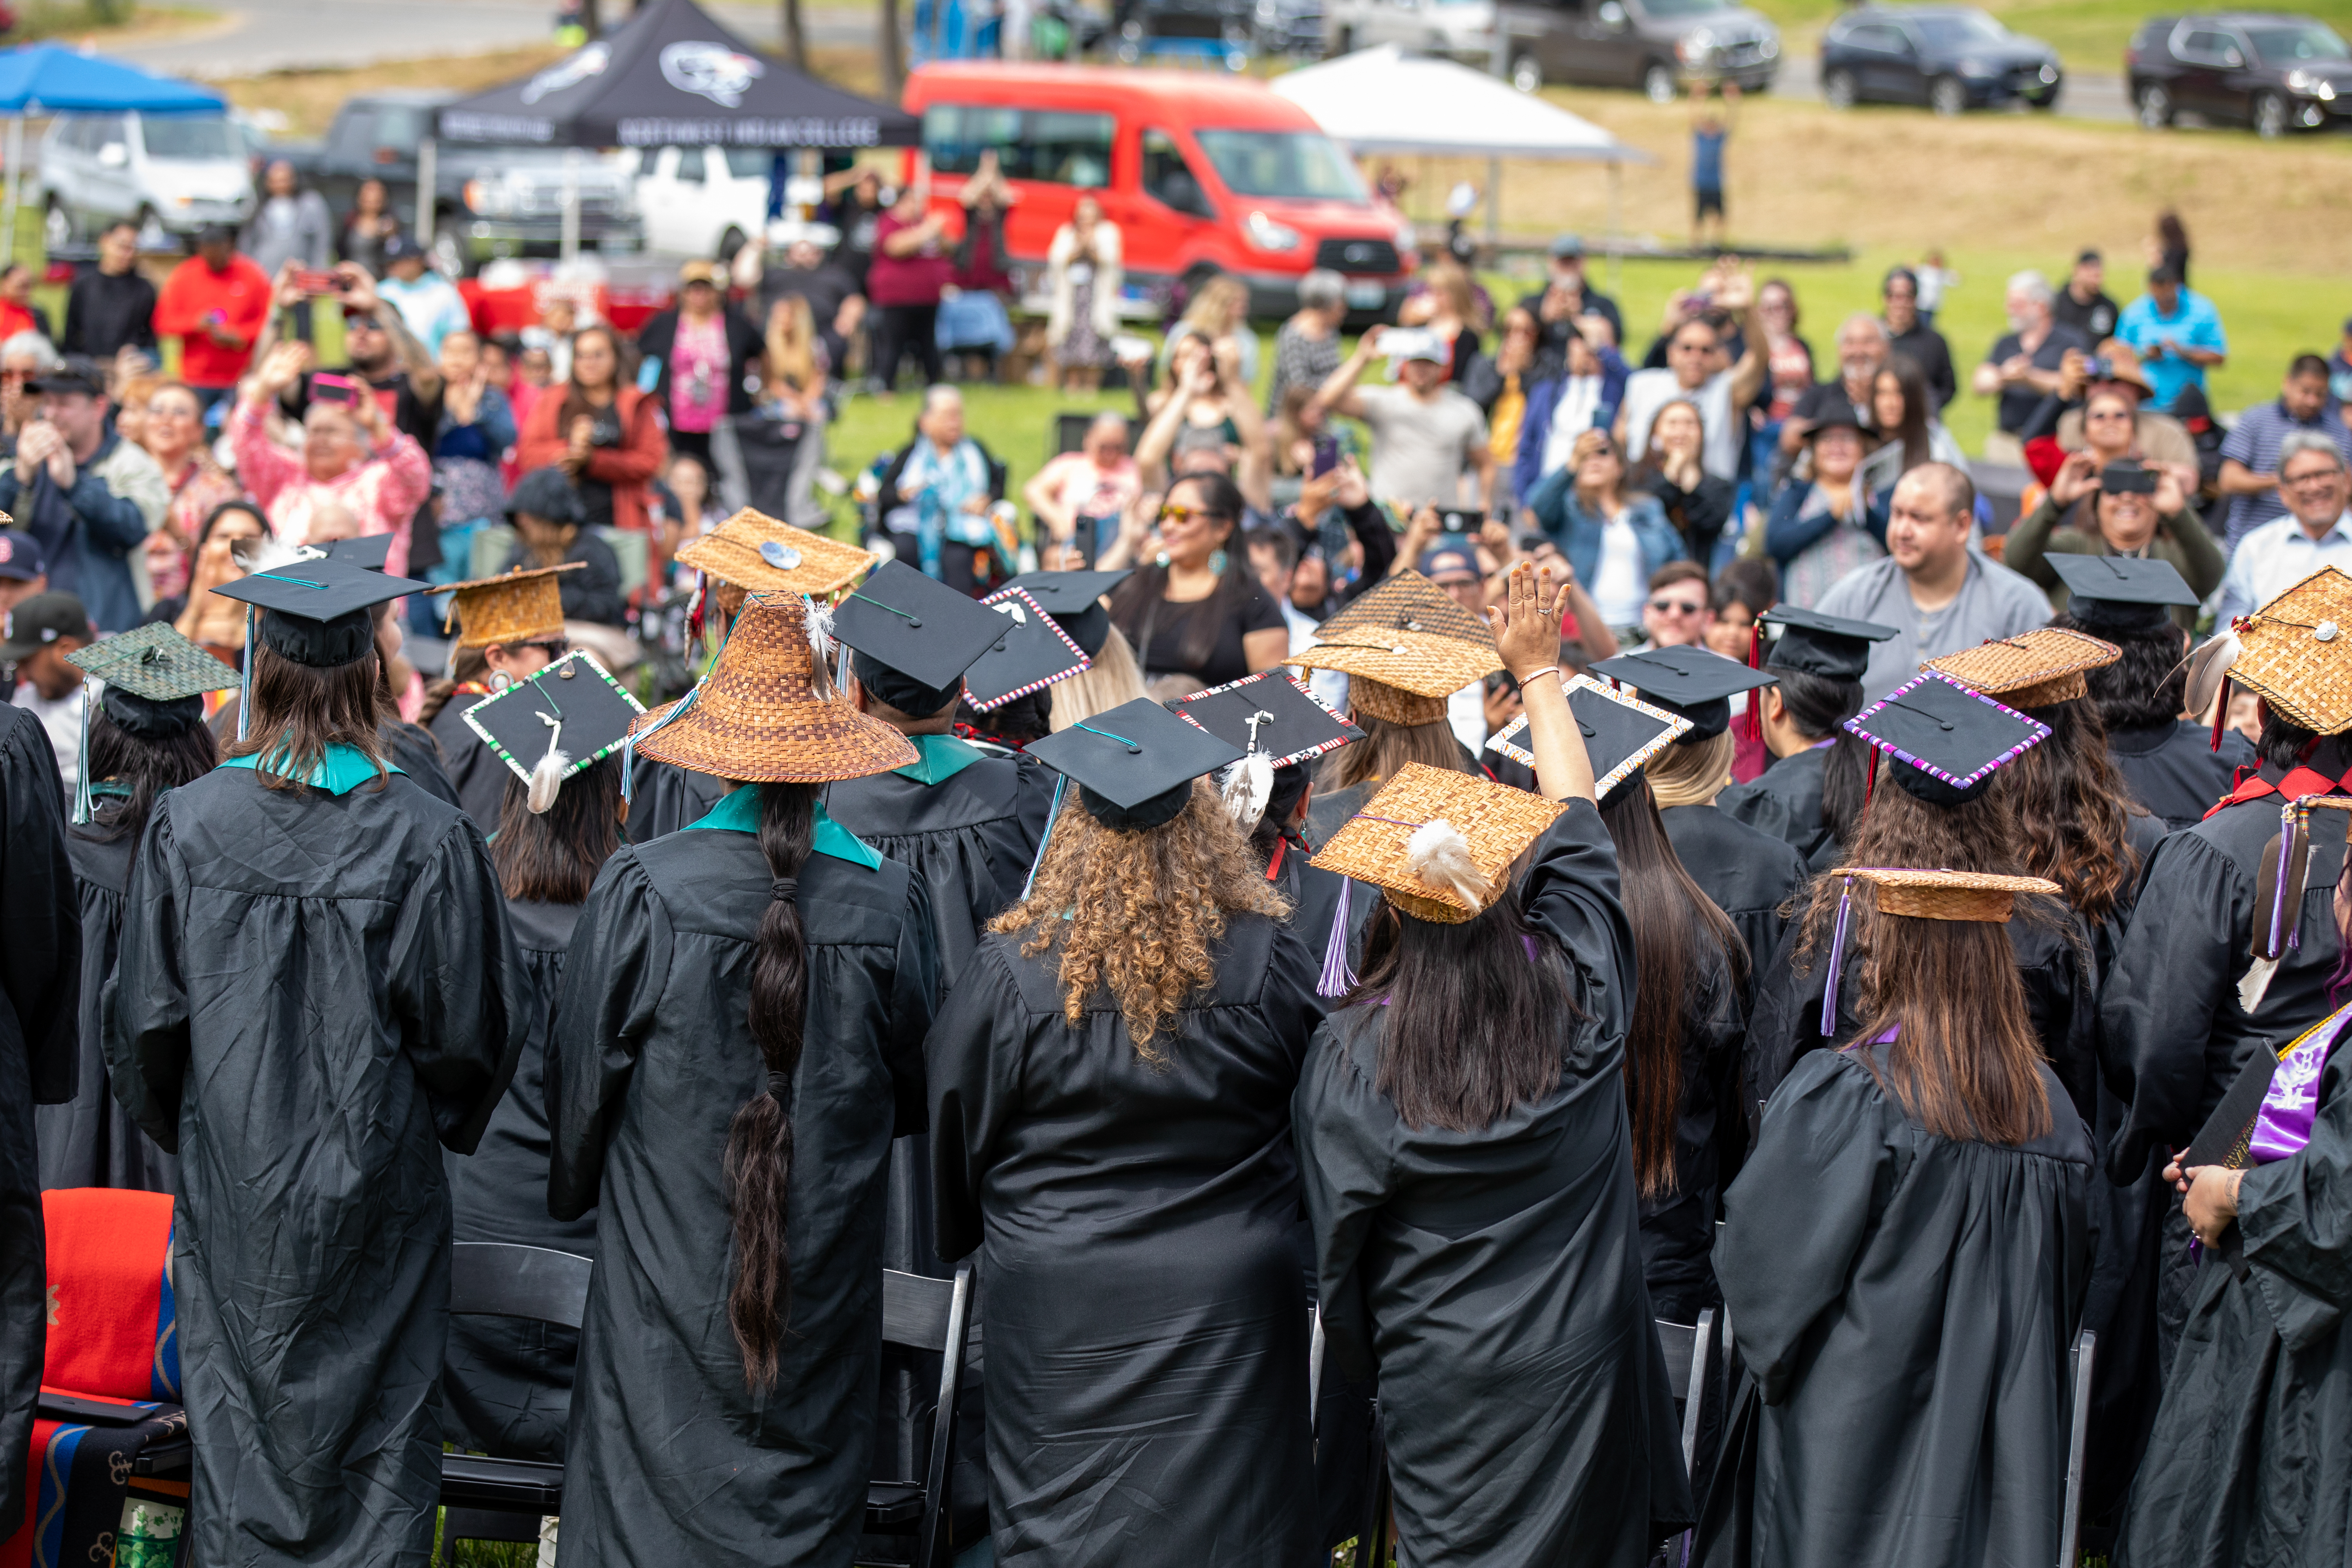 The backside of a group of students at their graduation wearing regalia. They are waving and looking at adults taking pictures of them.